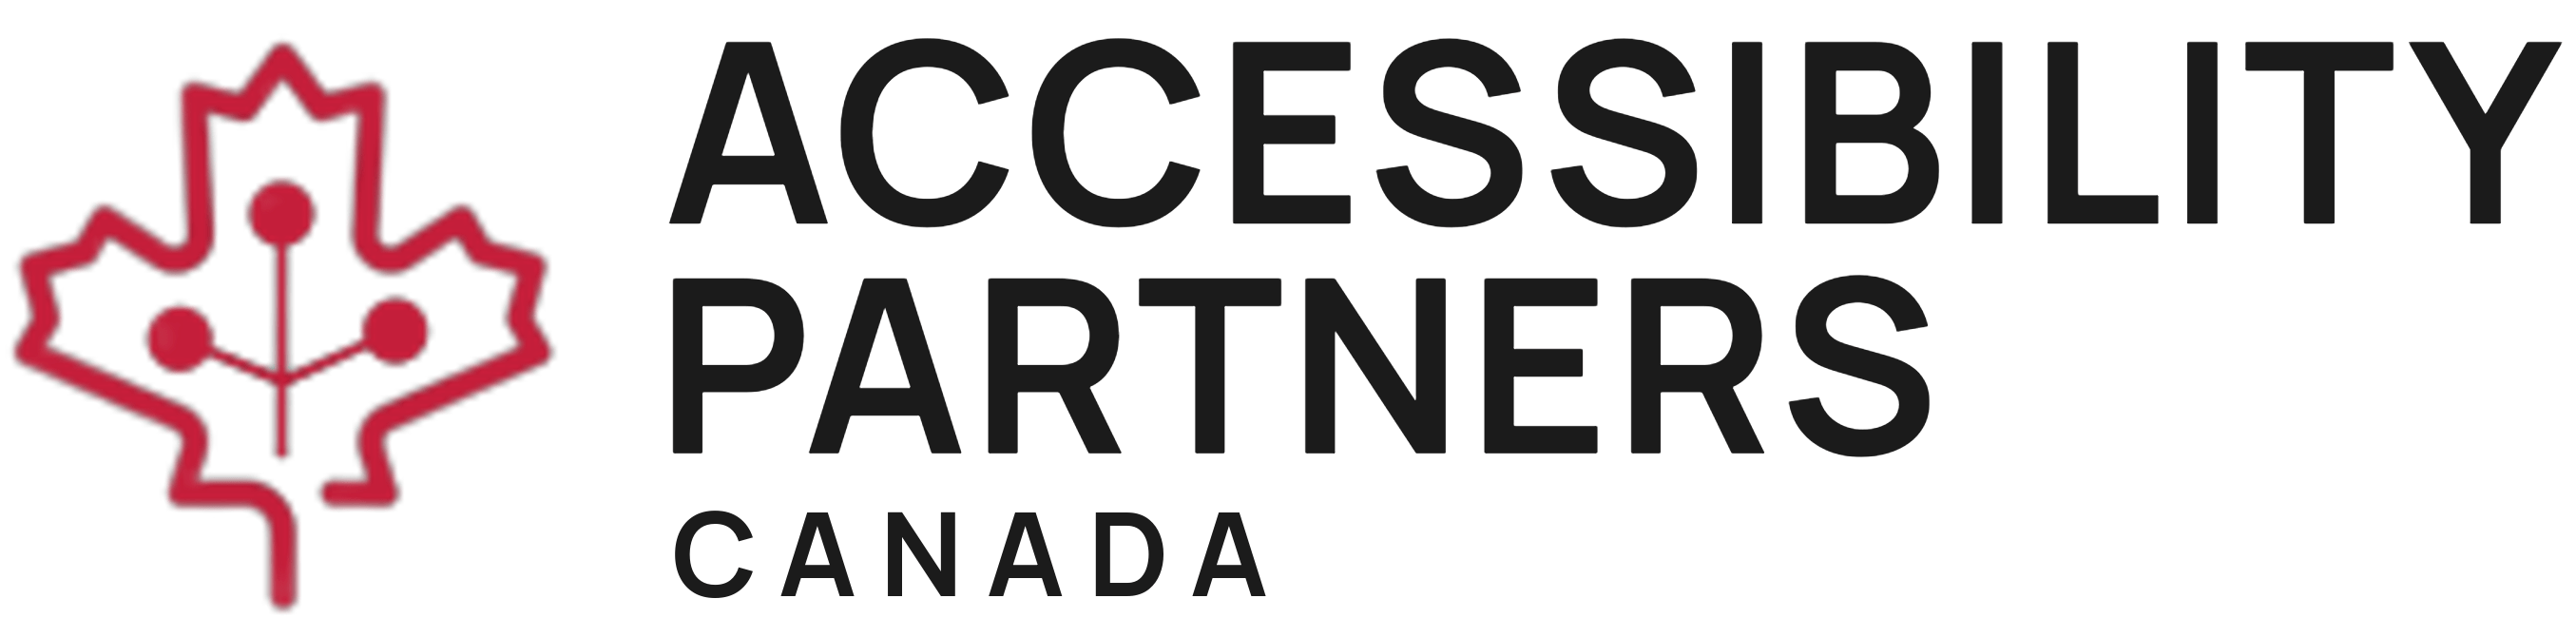 Accessibility Partners Canada